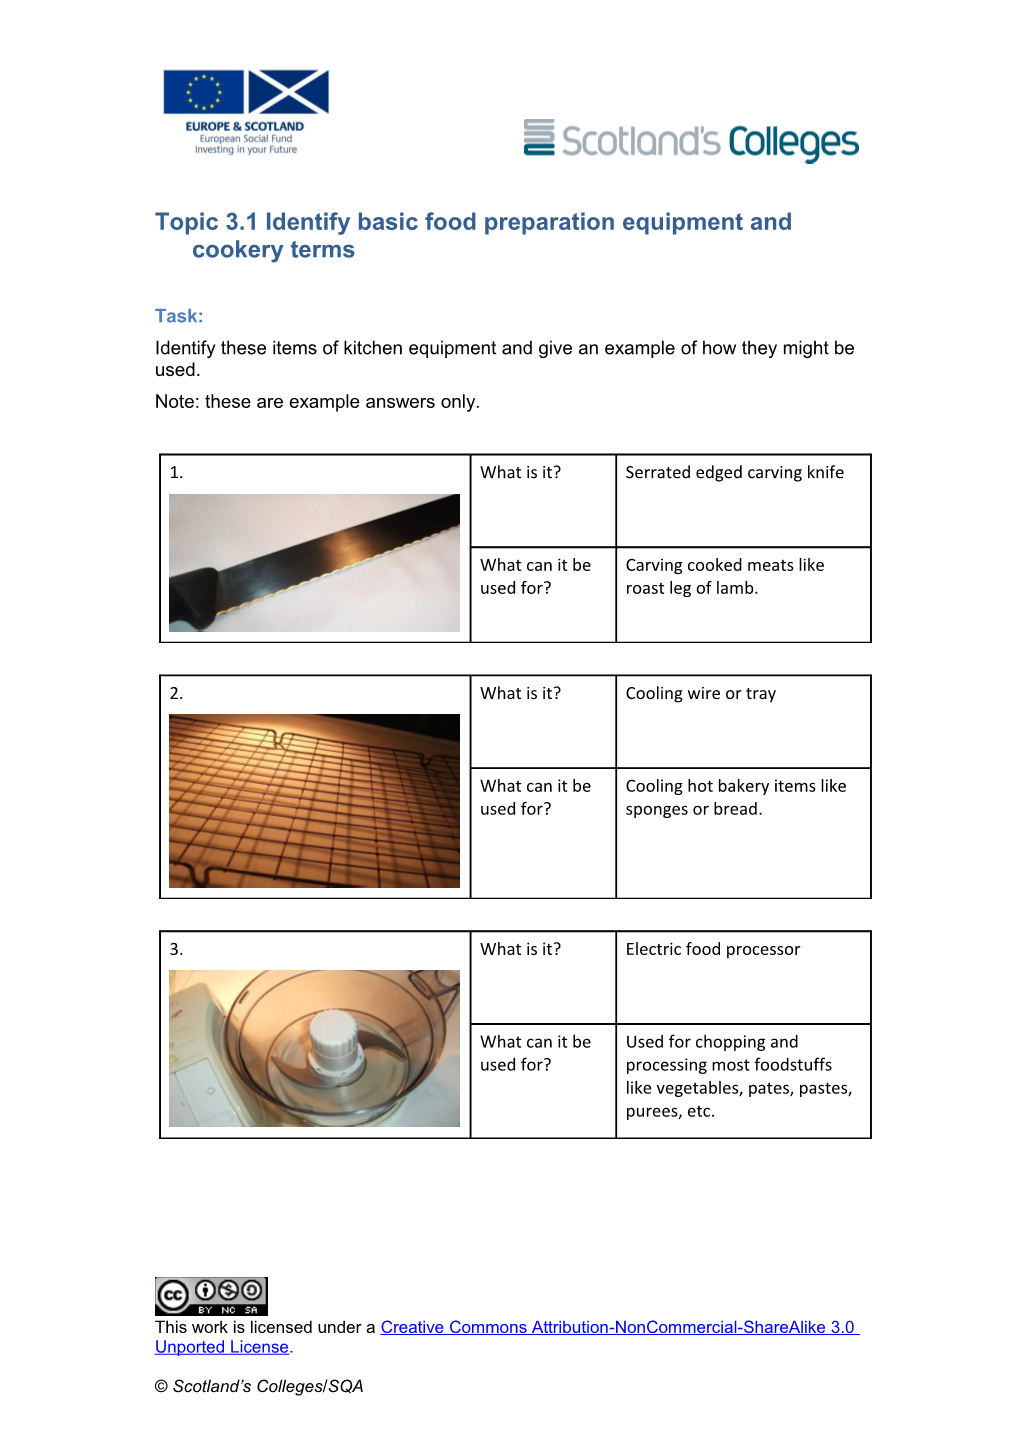 Topic 3.1 Identify Basic Food Preparation Equipment and Cookery Terms